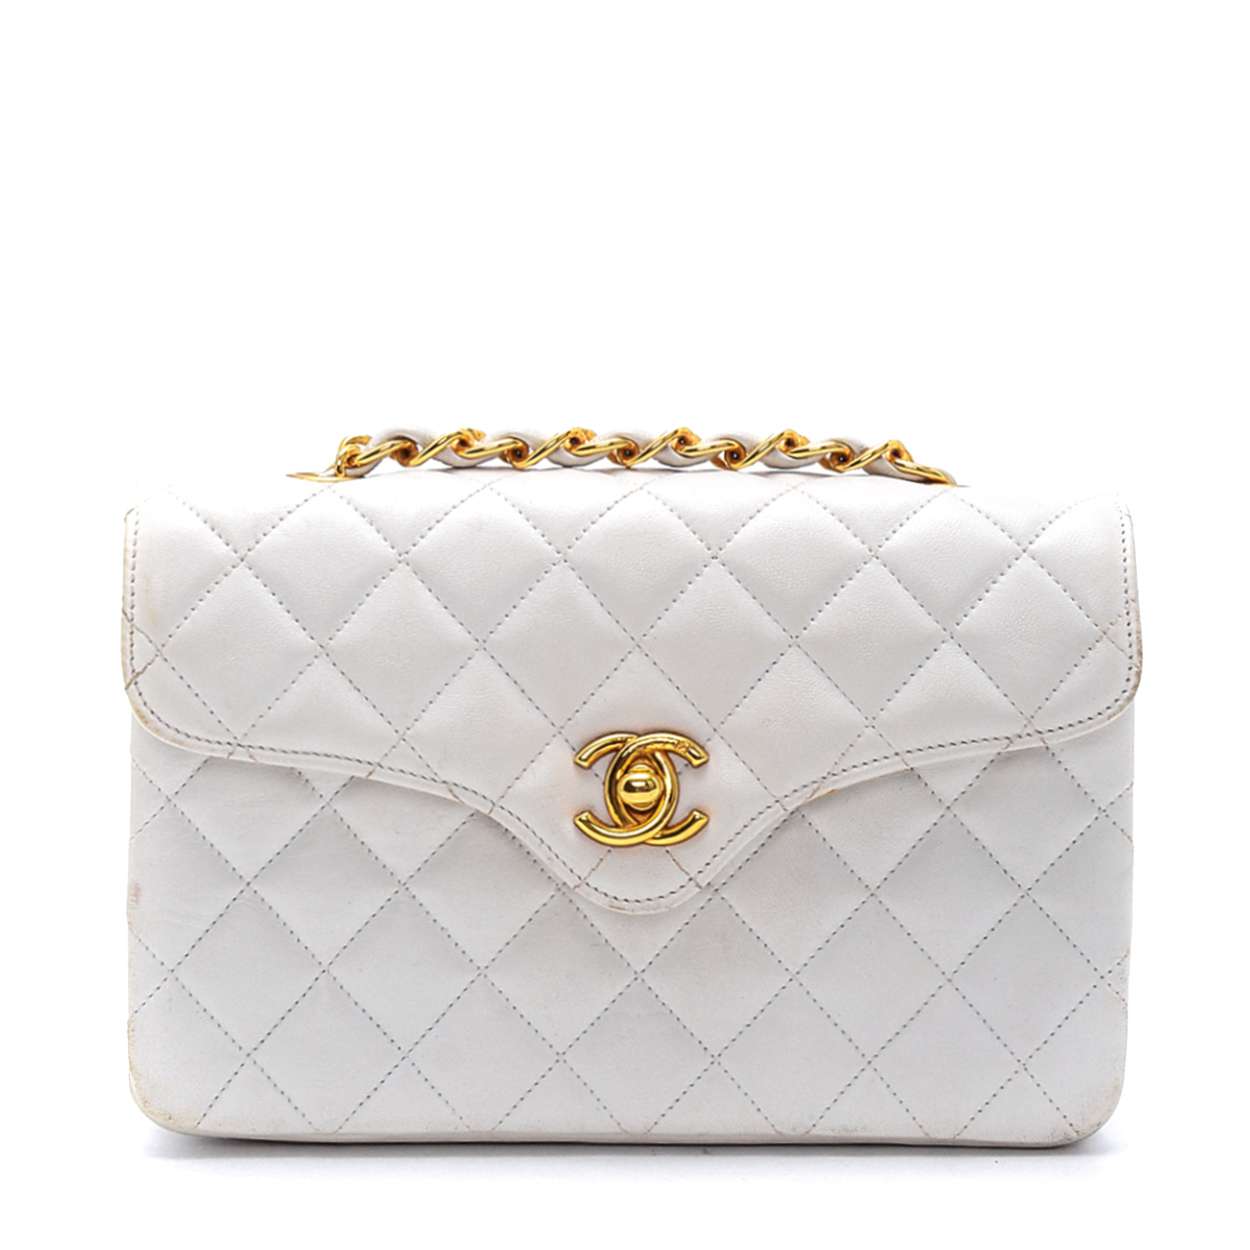 Chanel - White Quilted  Lambskin Leather Vintage Flap Crossbody Bag